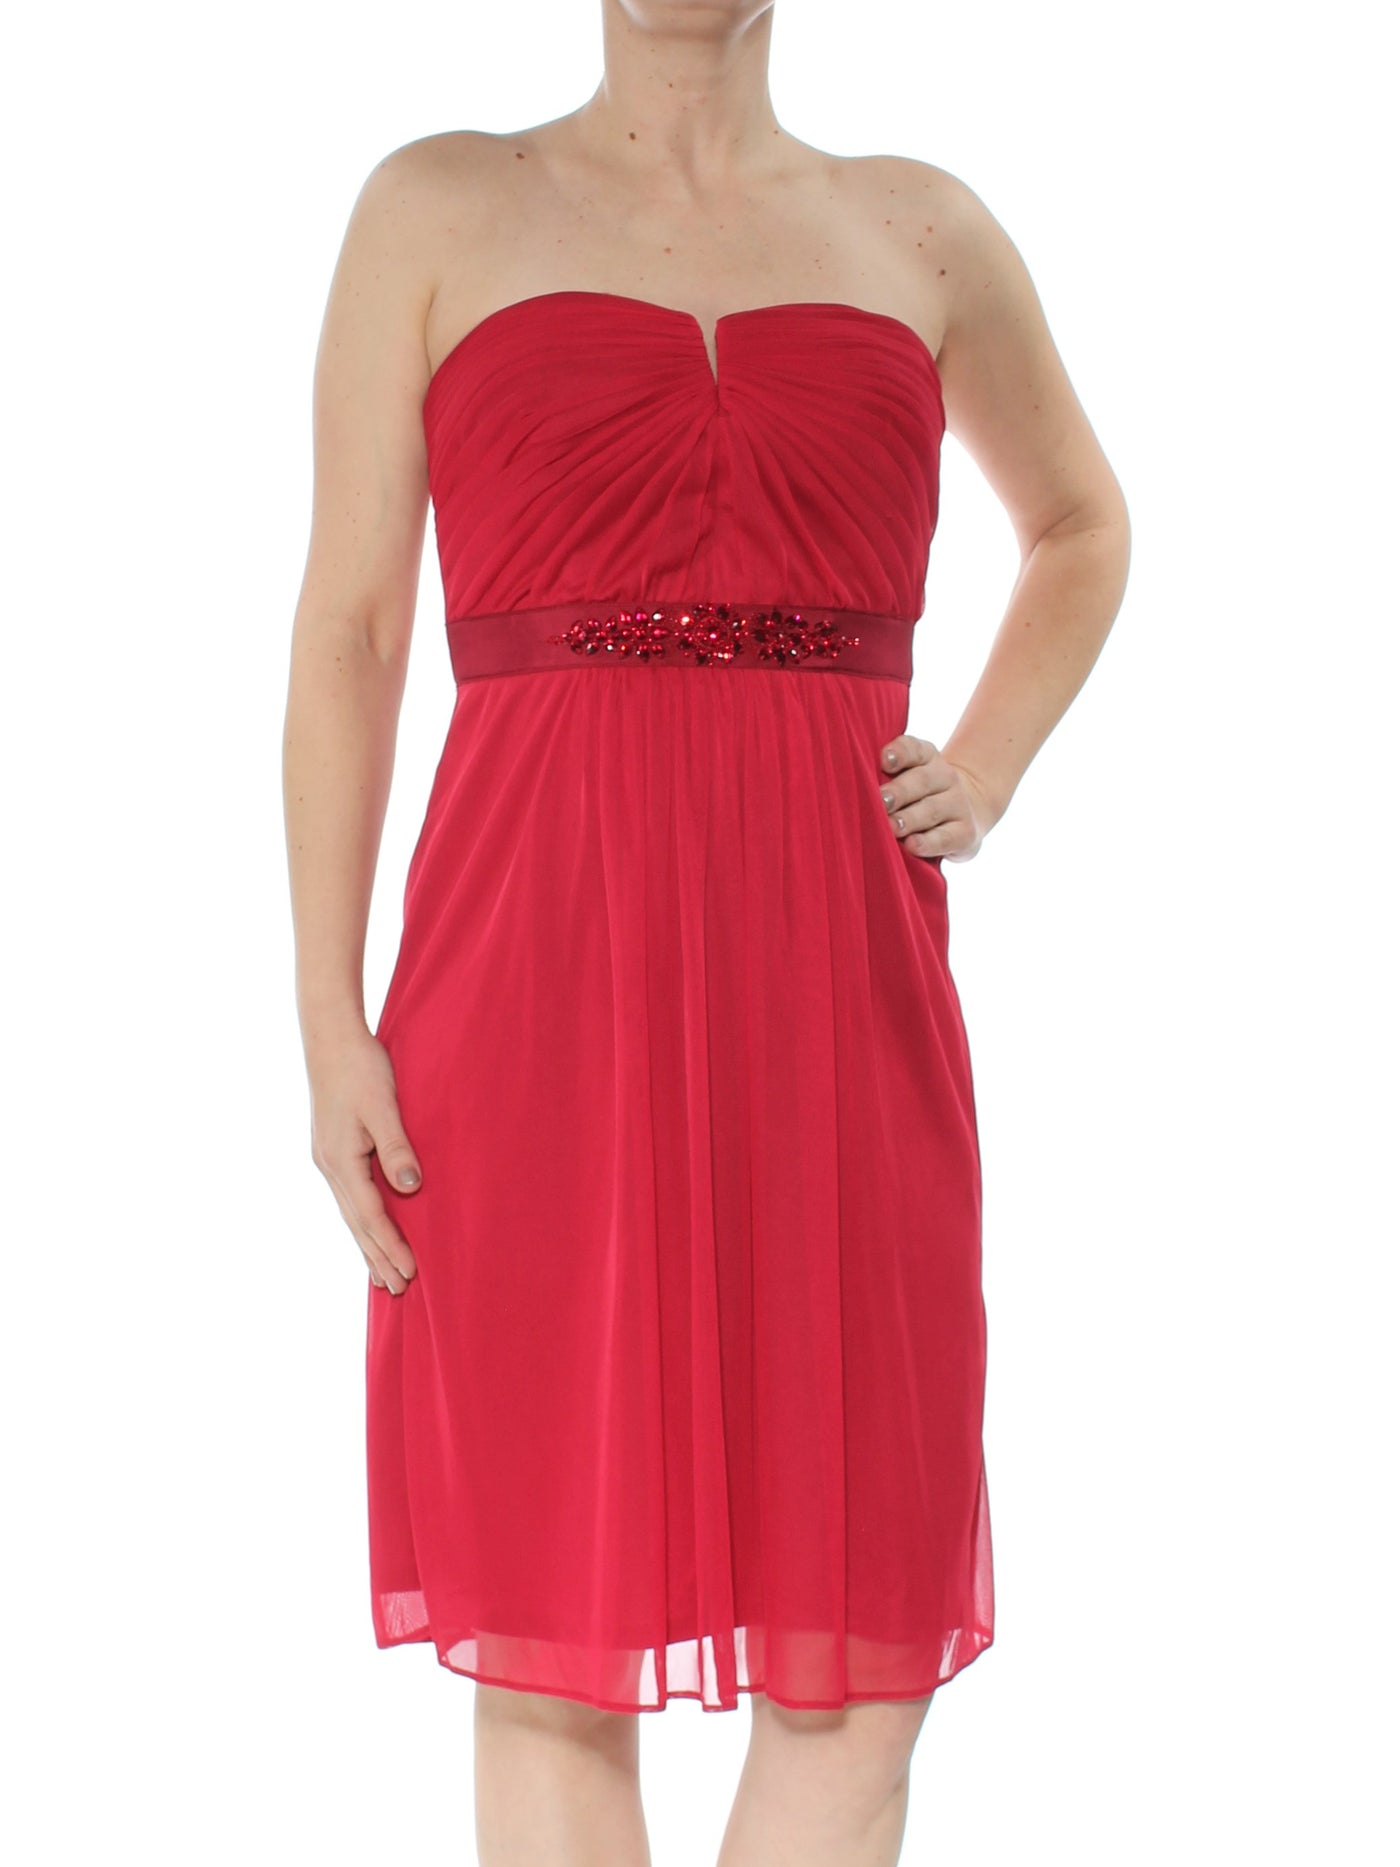 ADRIANNA PAPELL Womens Red Embellished Strapless Knee Length Formal Empire Waist Dress